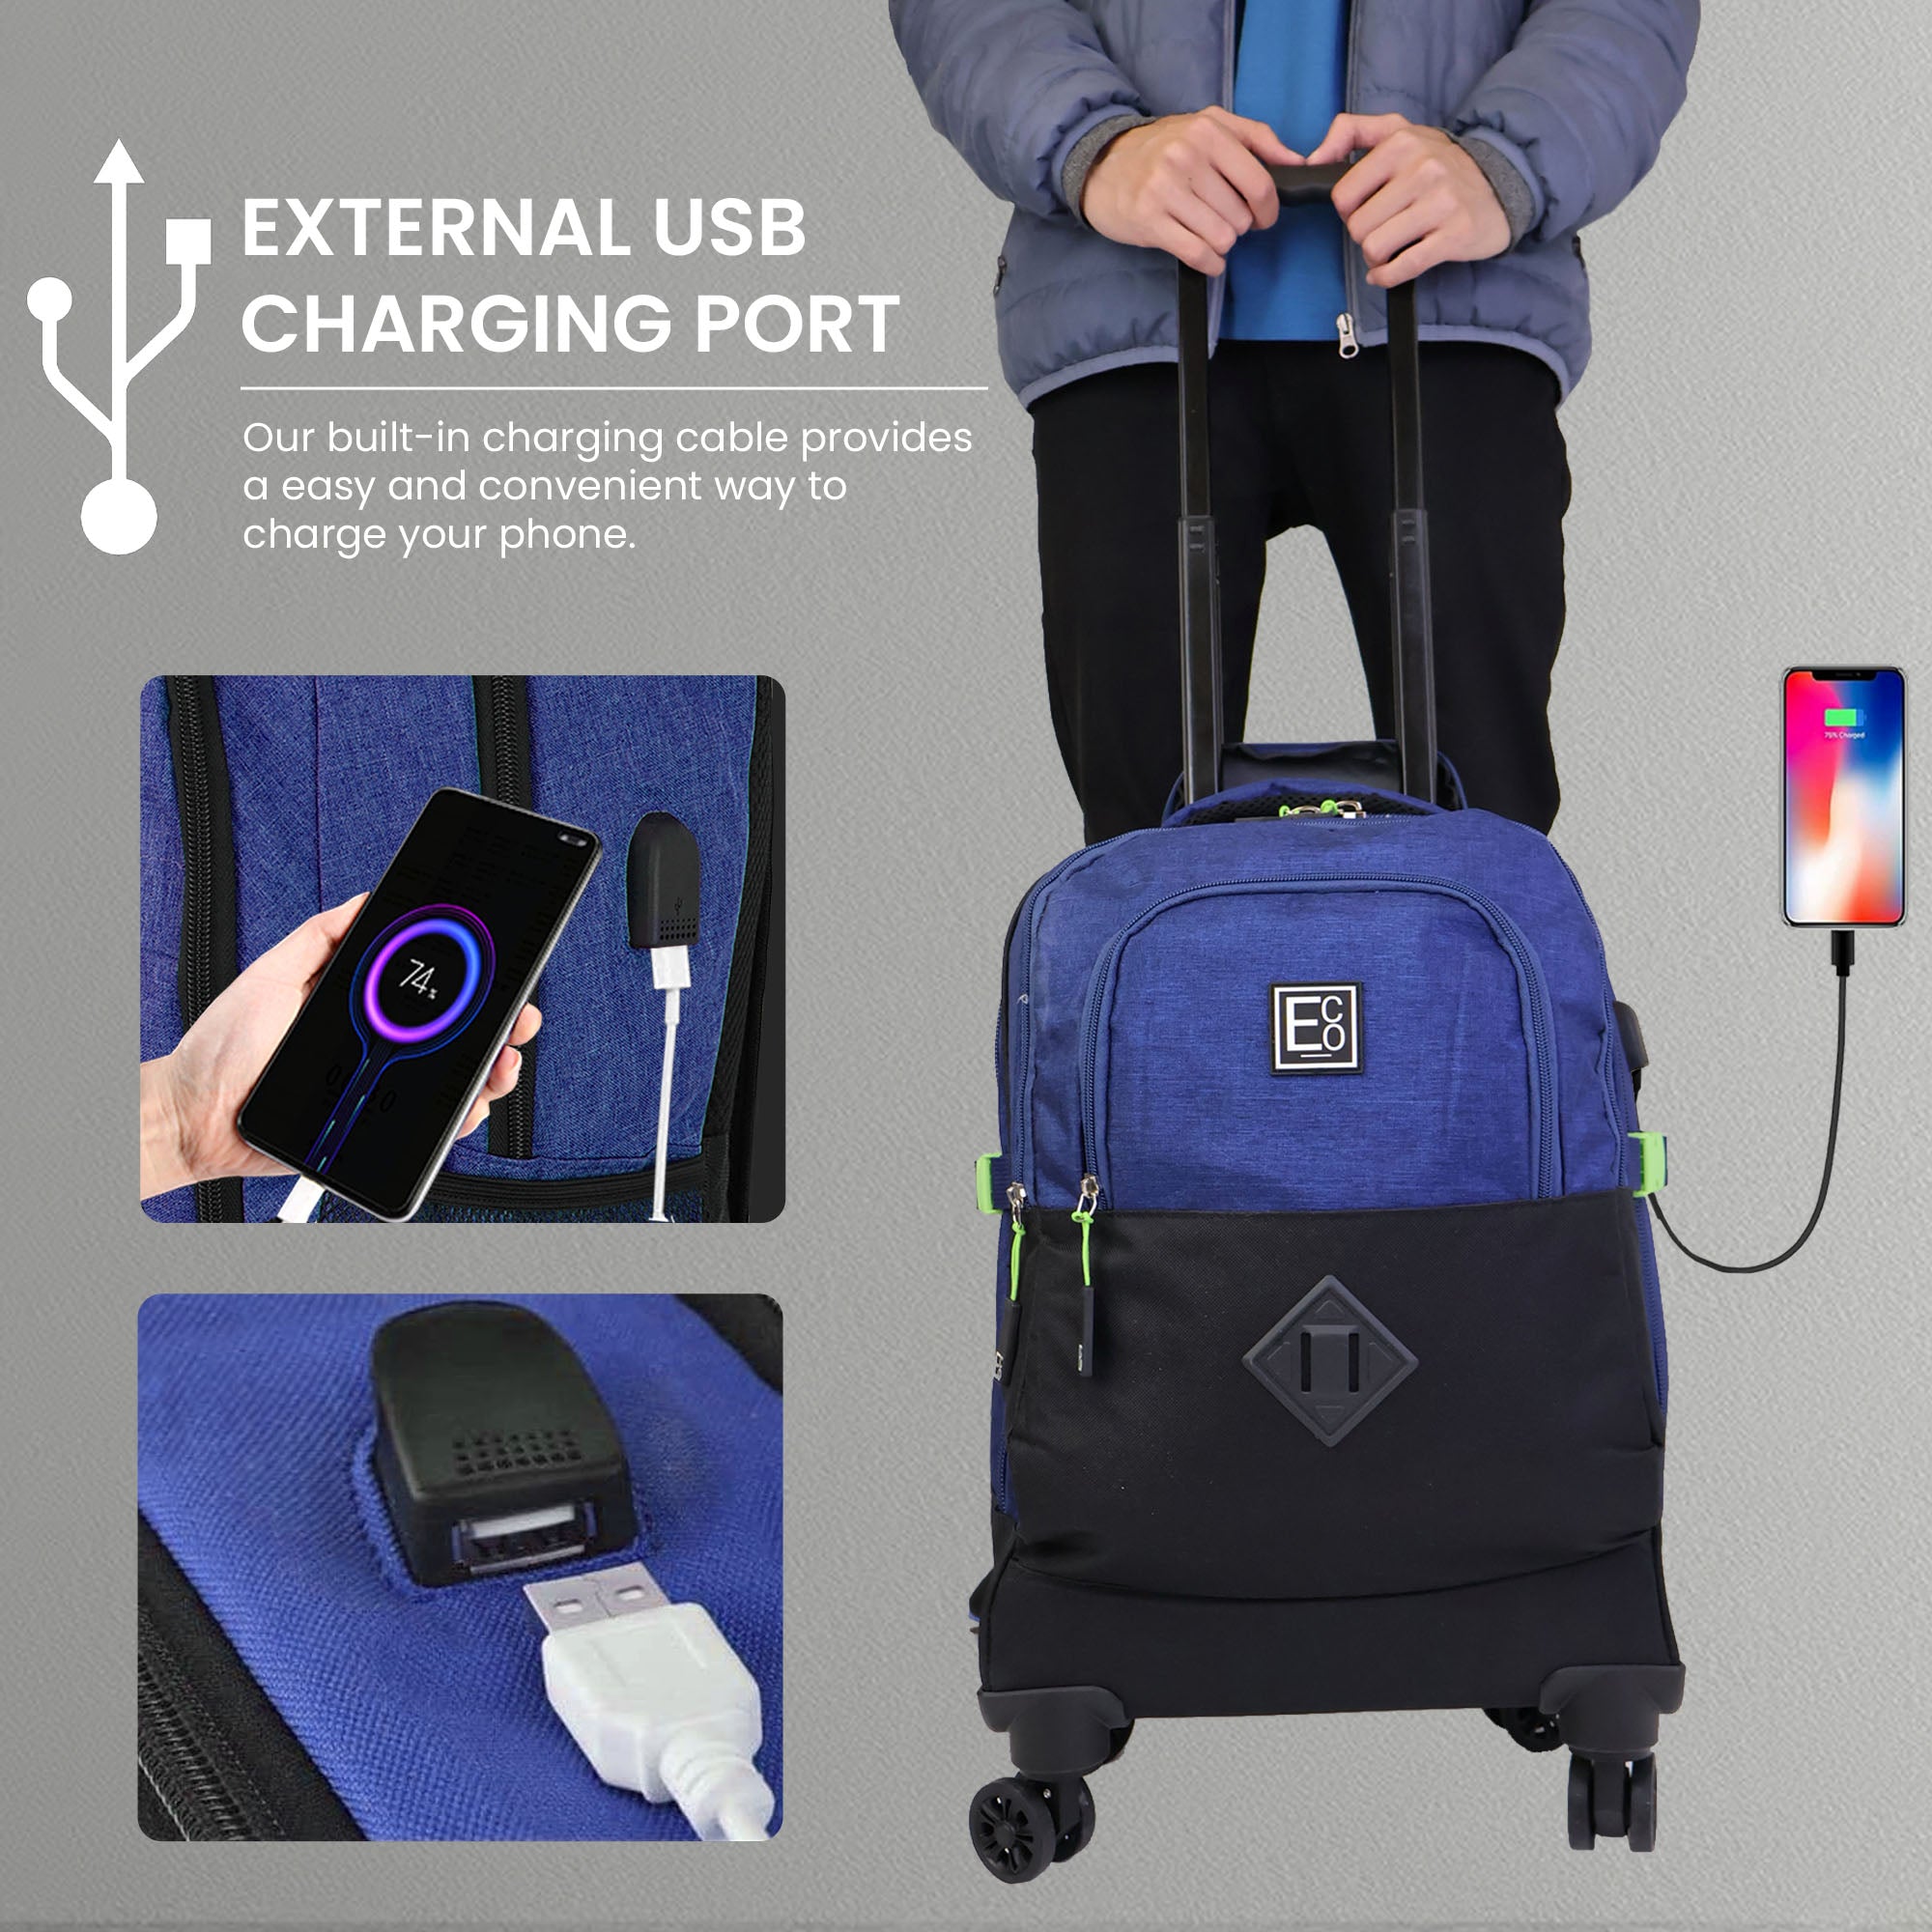 Spinner Trolley Backpack with Coolerbag Compart and USB Port